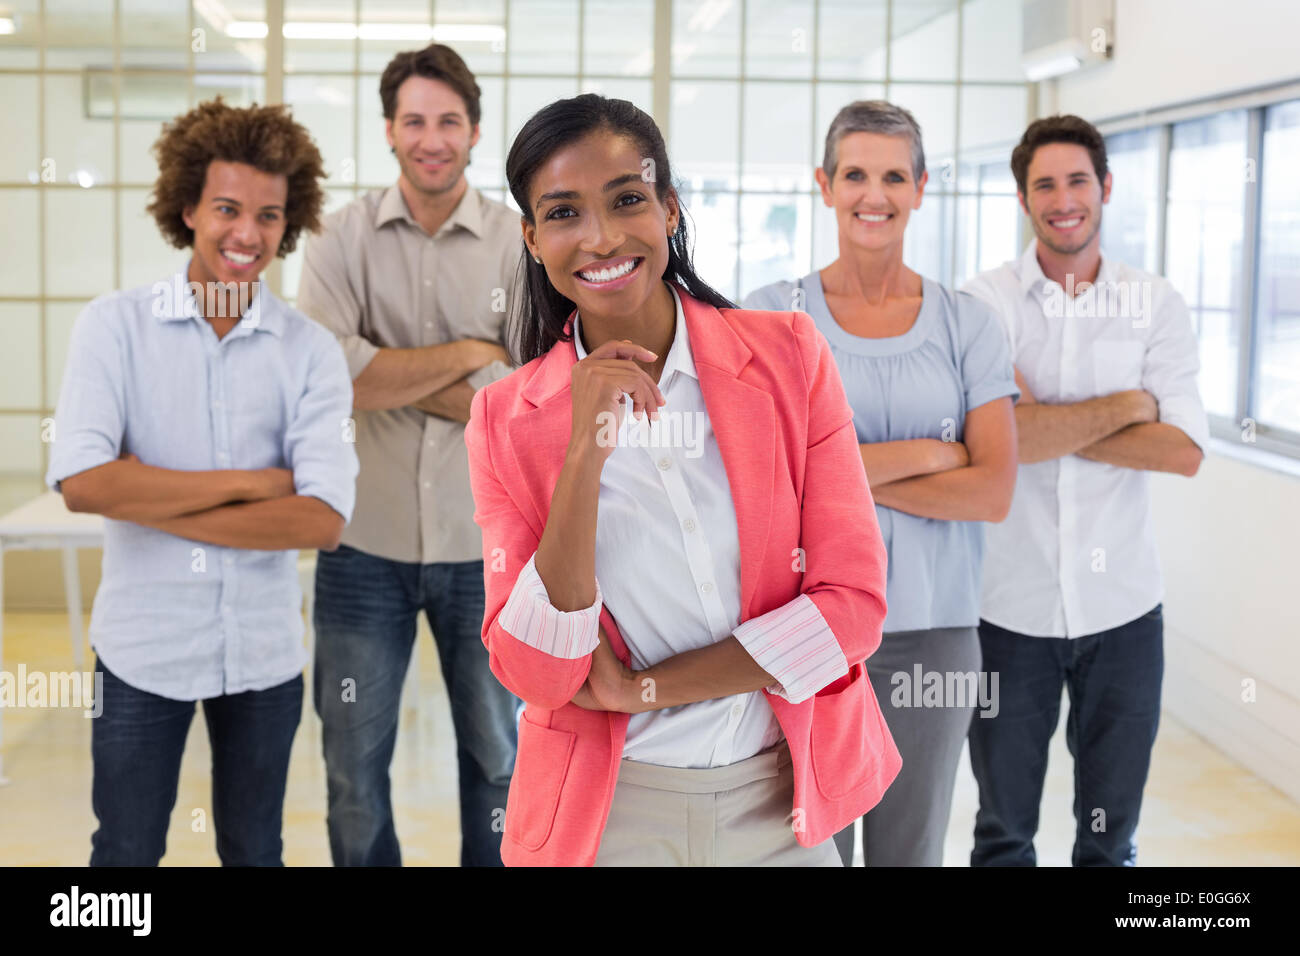 Well dressed workers with arms folded smiling at camera Stock Photo